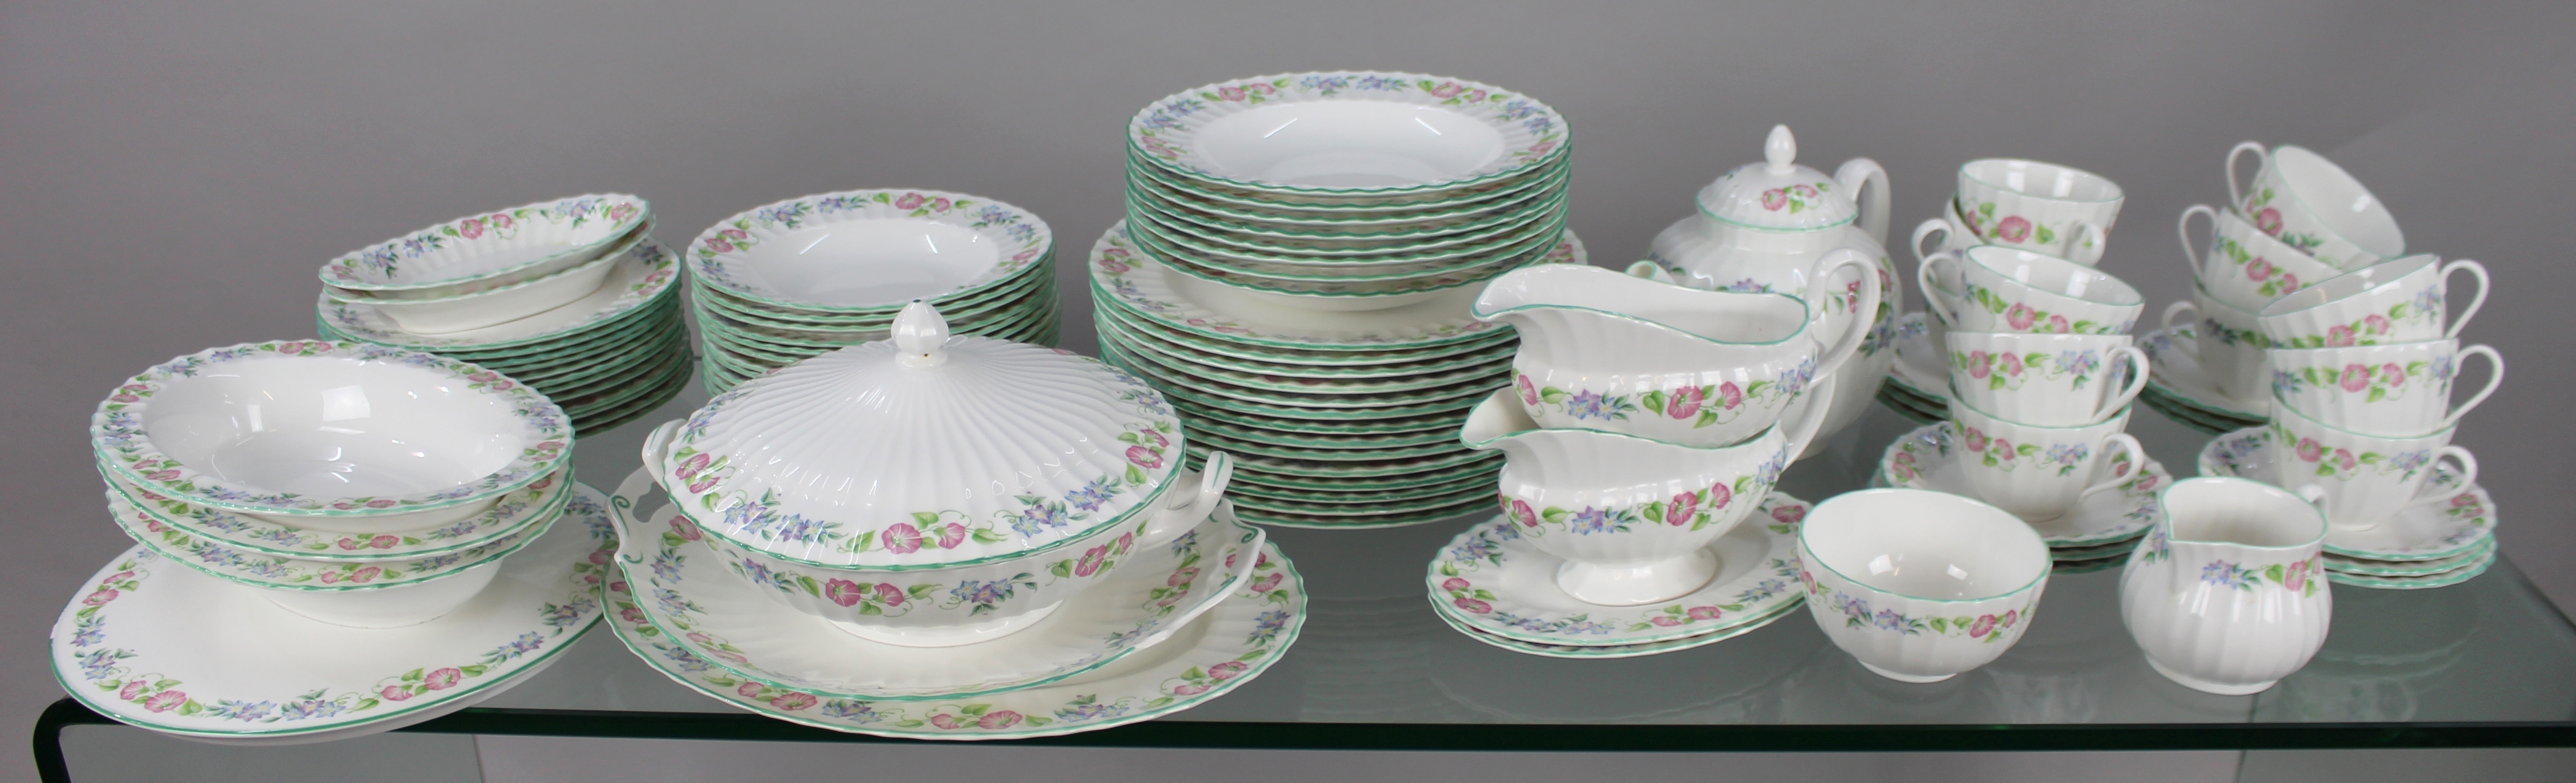 Royal Worcester English Garden 12 Place Dinner Service - Image 2 of 9